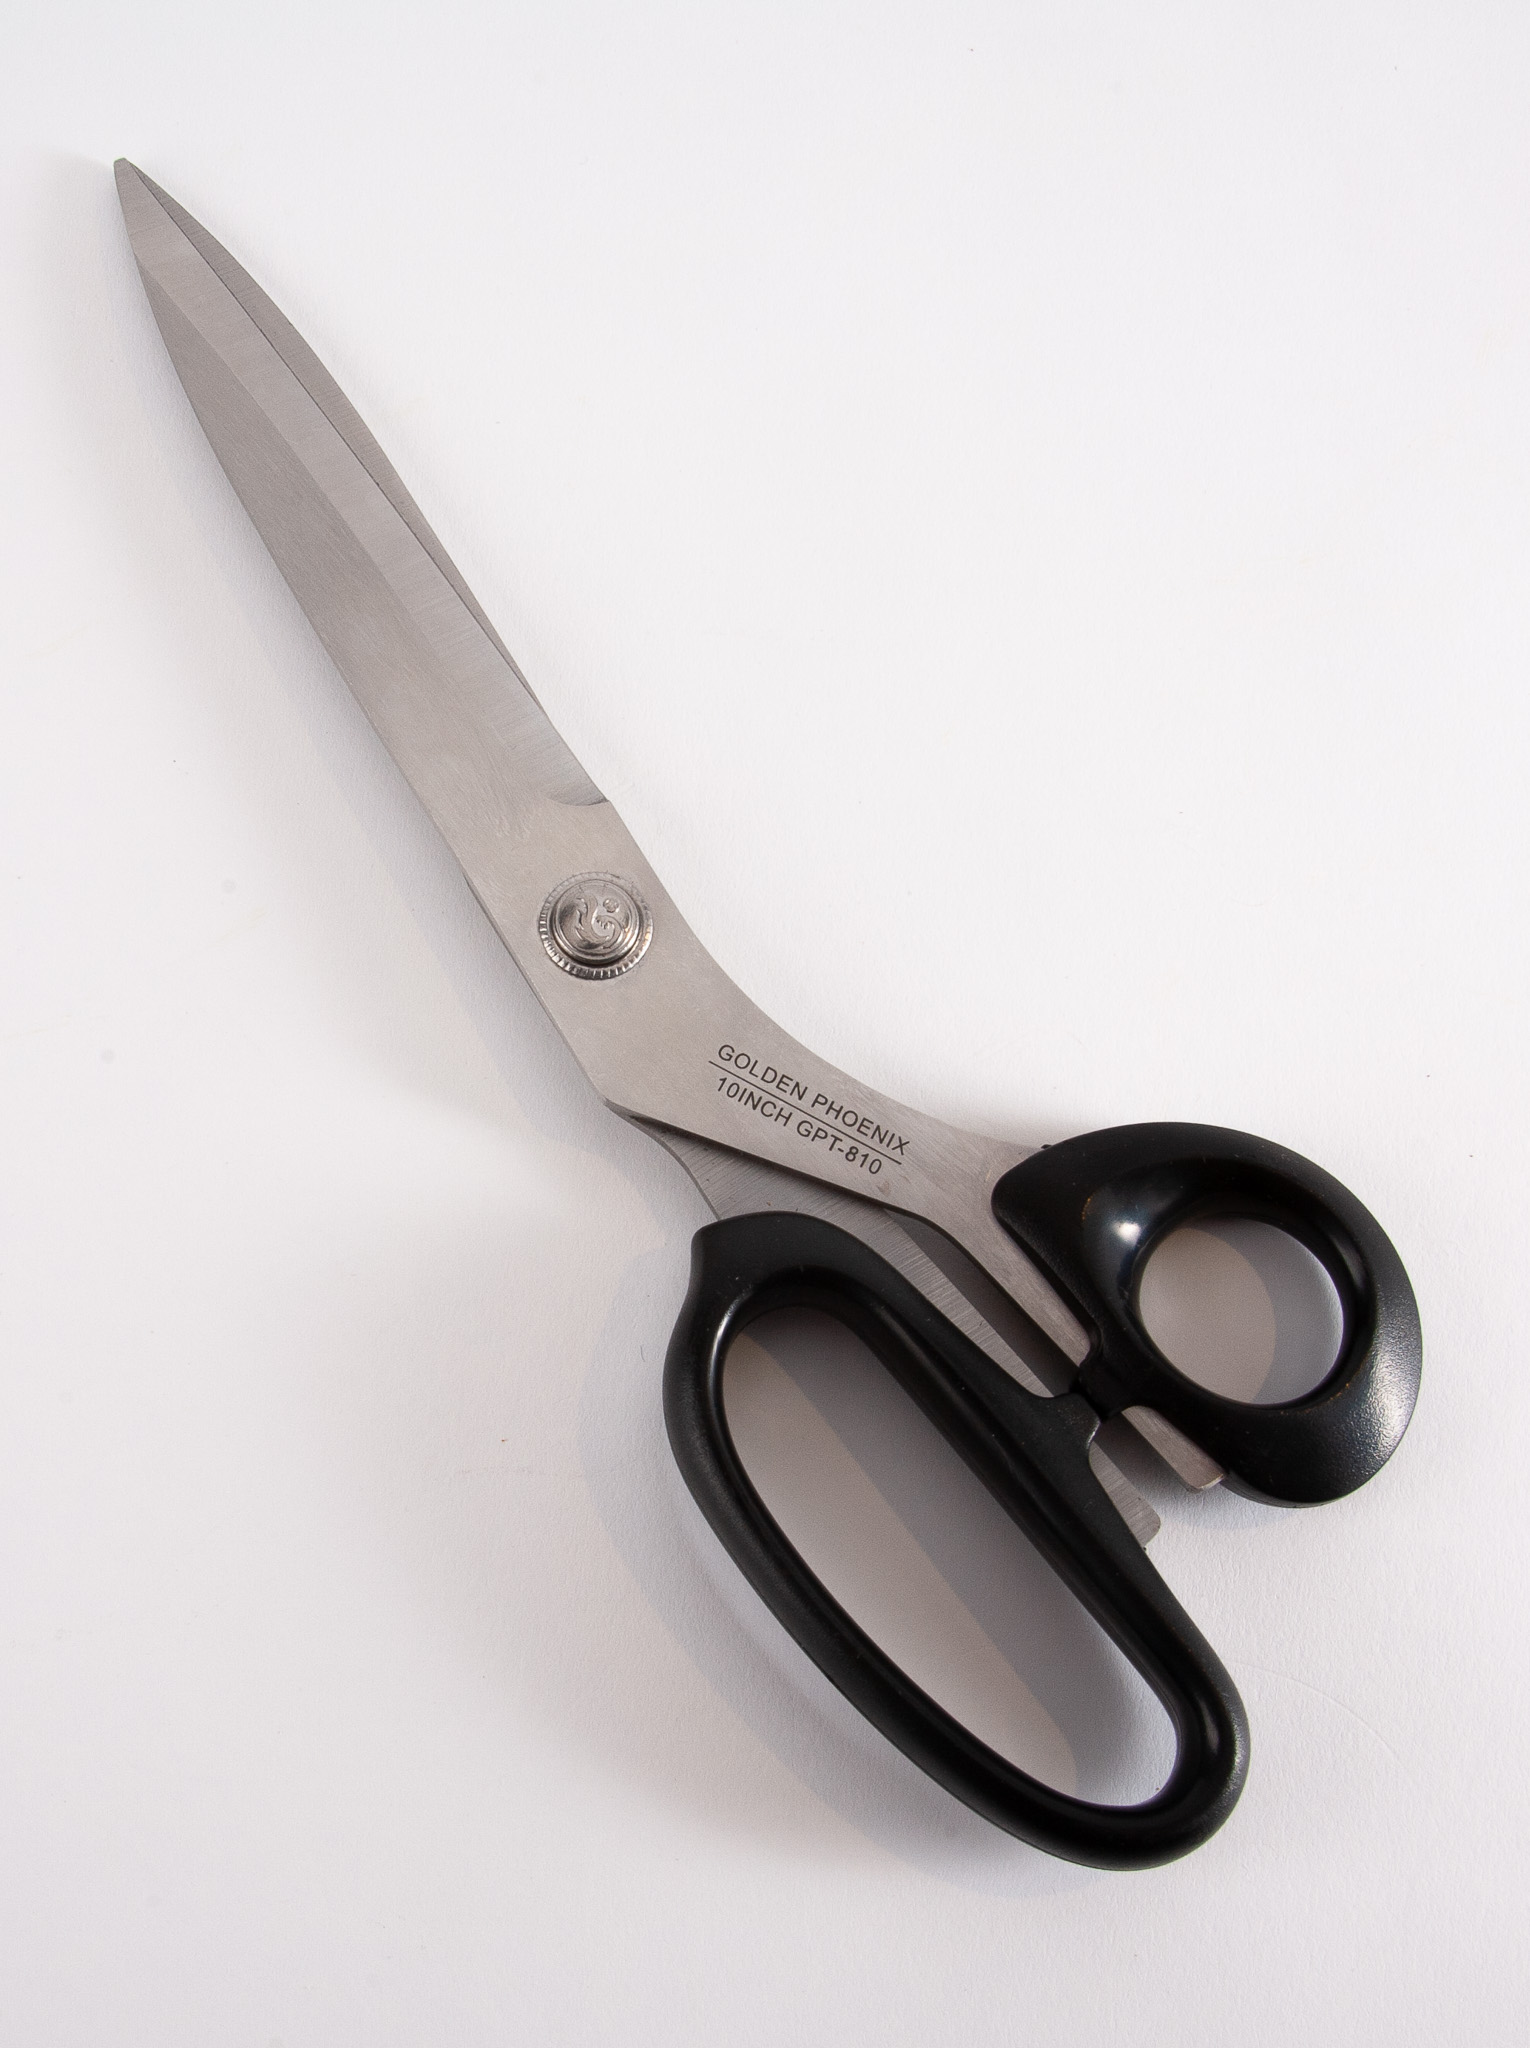 10inch Stainless Steel Scissor for Quilting - Quilting Craft Hub